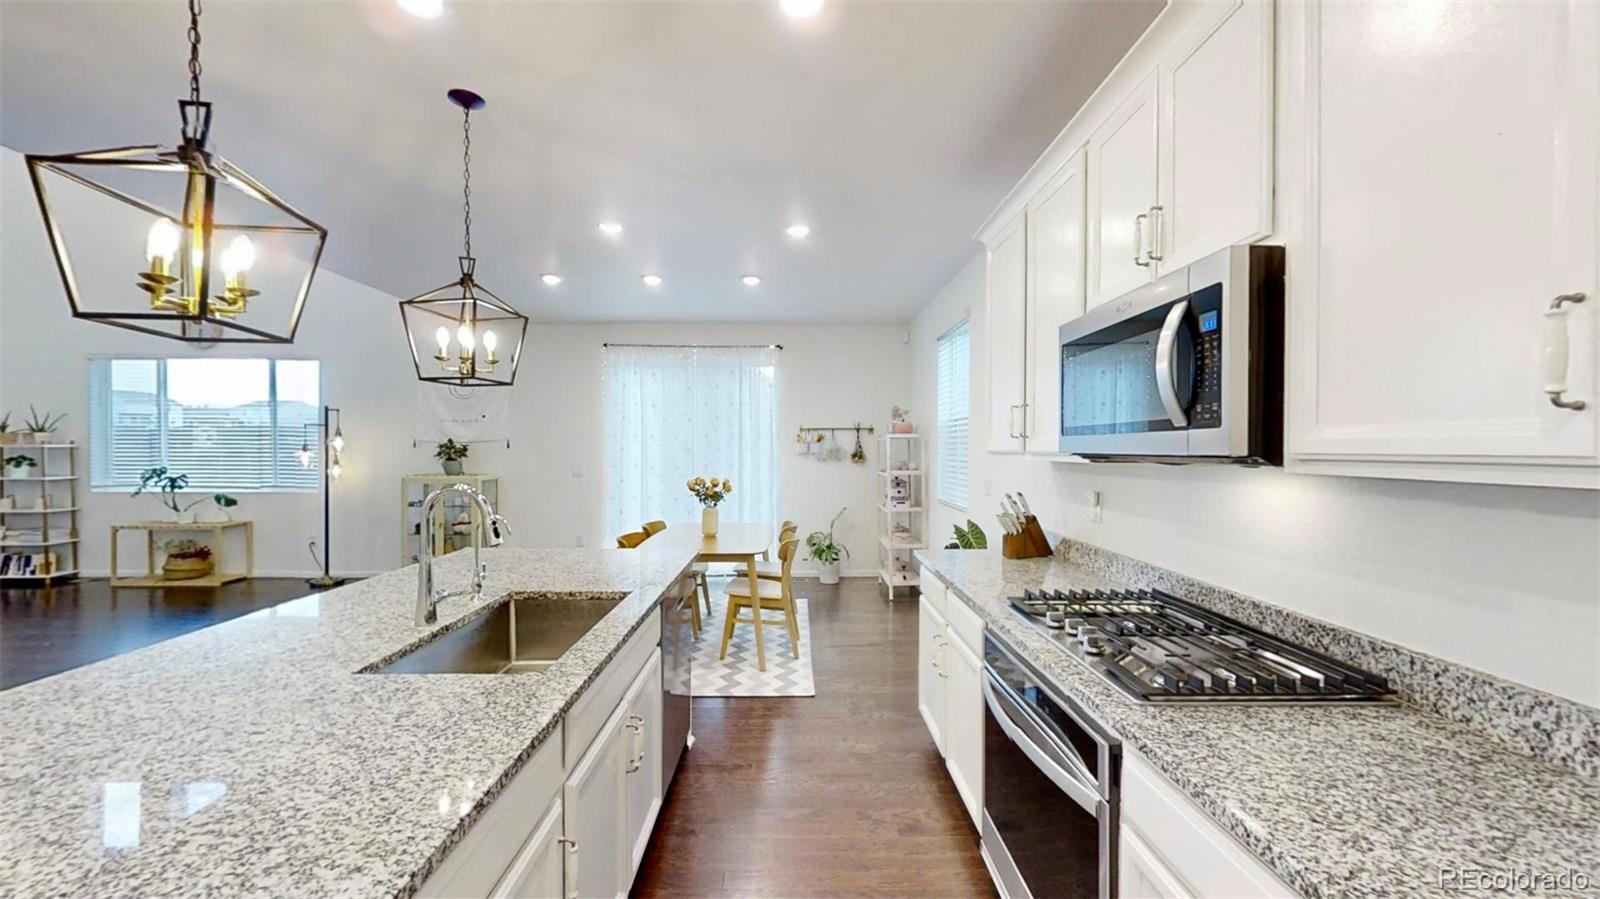 a kitchen with stainless steel appliances granite countertop a stove a sink a microwave oven and a counter space